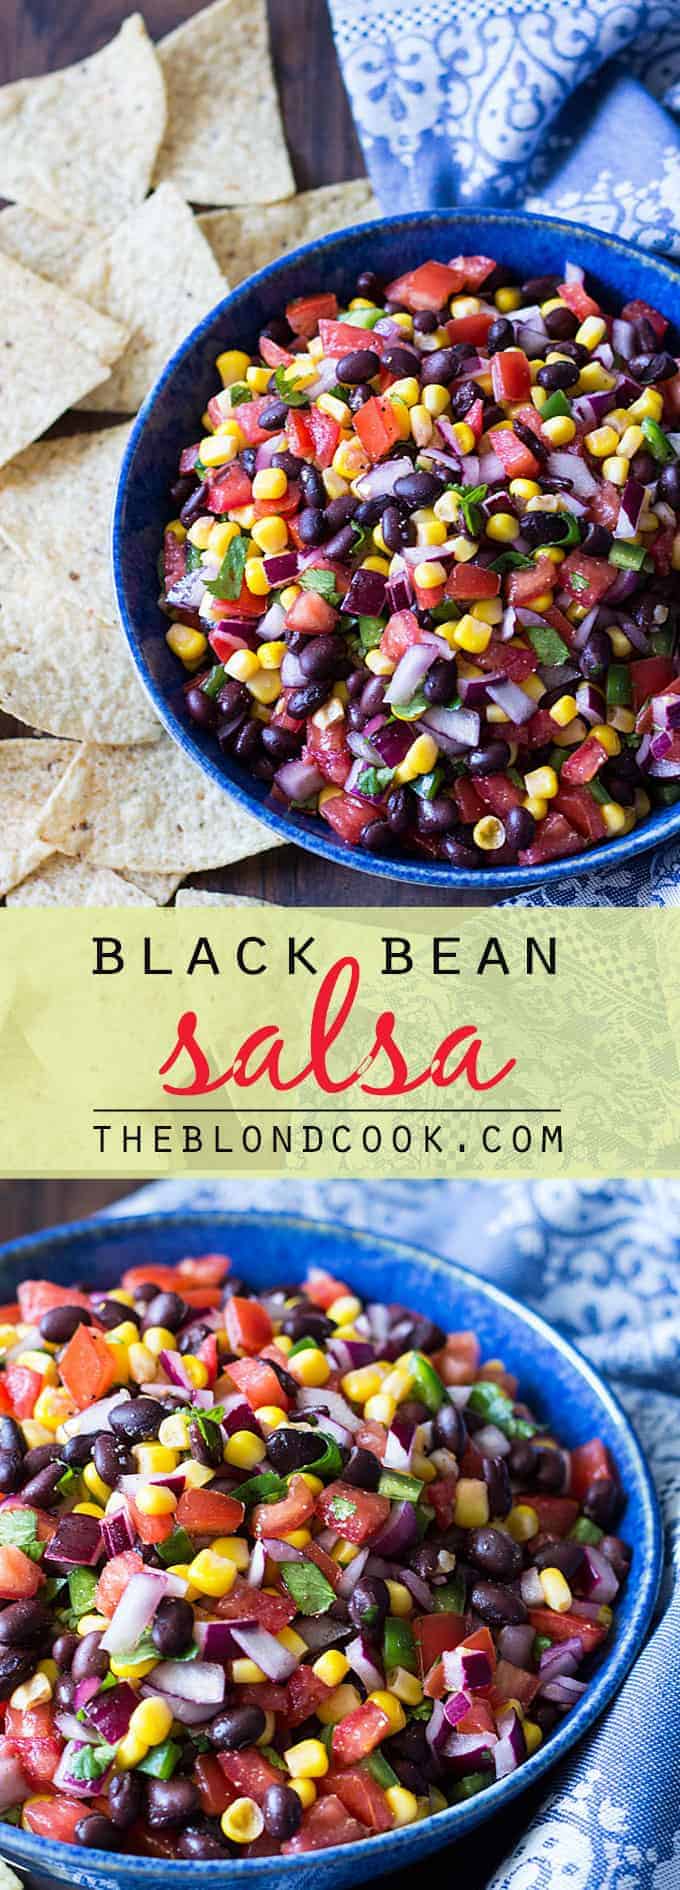 Two images of salsa in a blue bowl.  Text in center says black bean salsa.